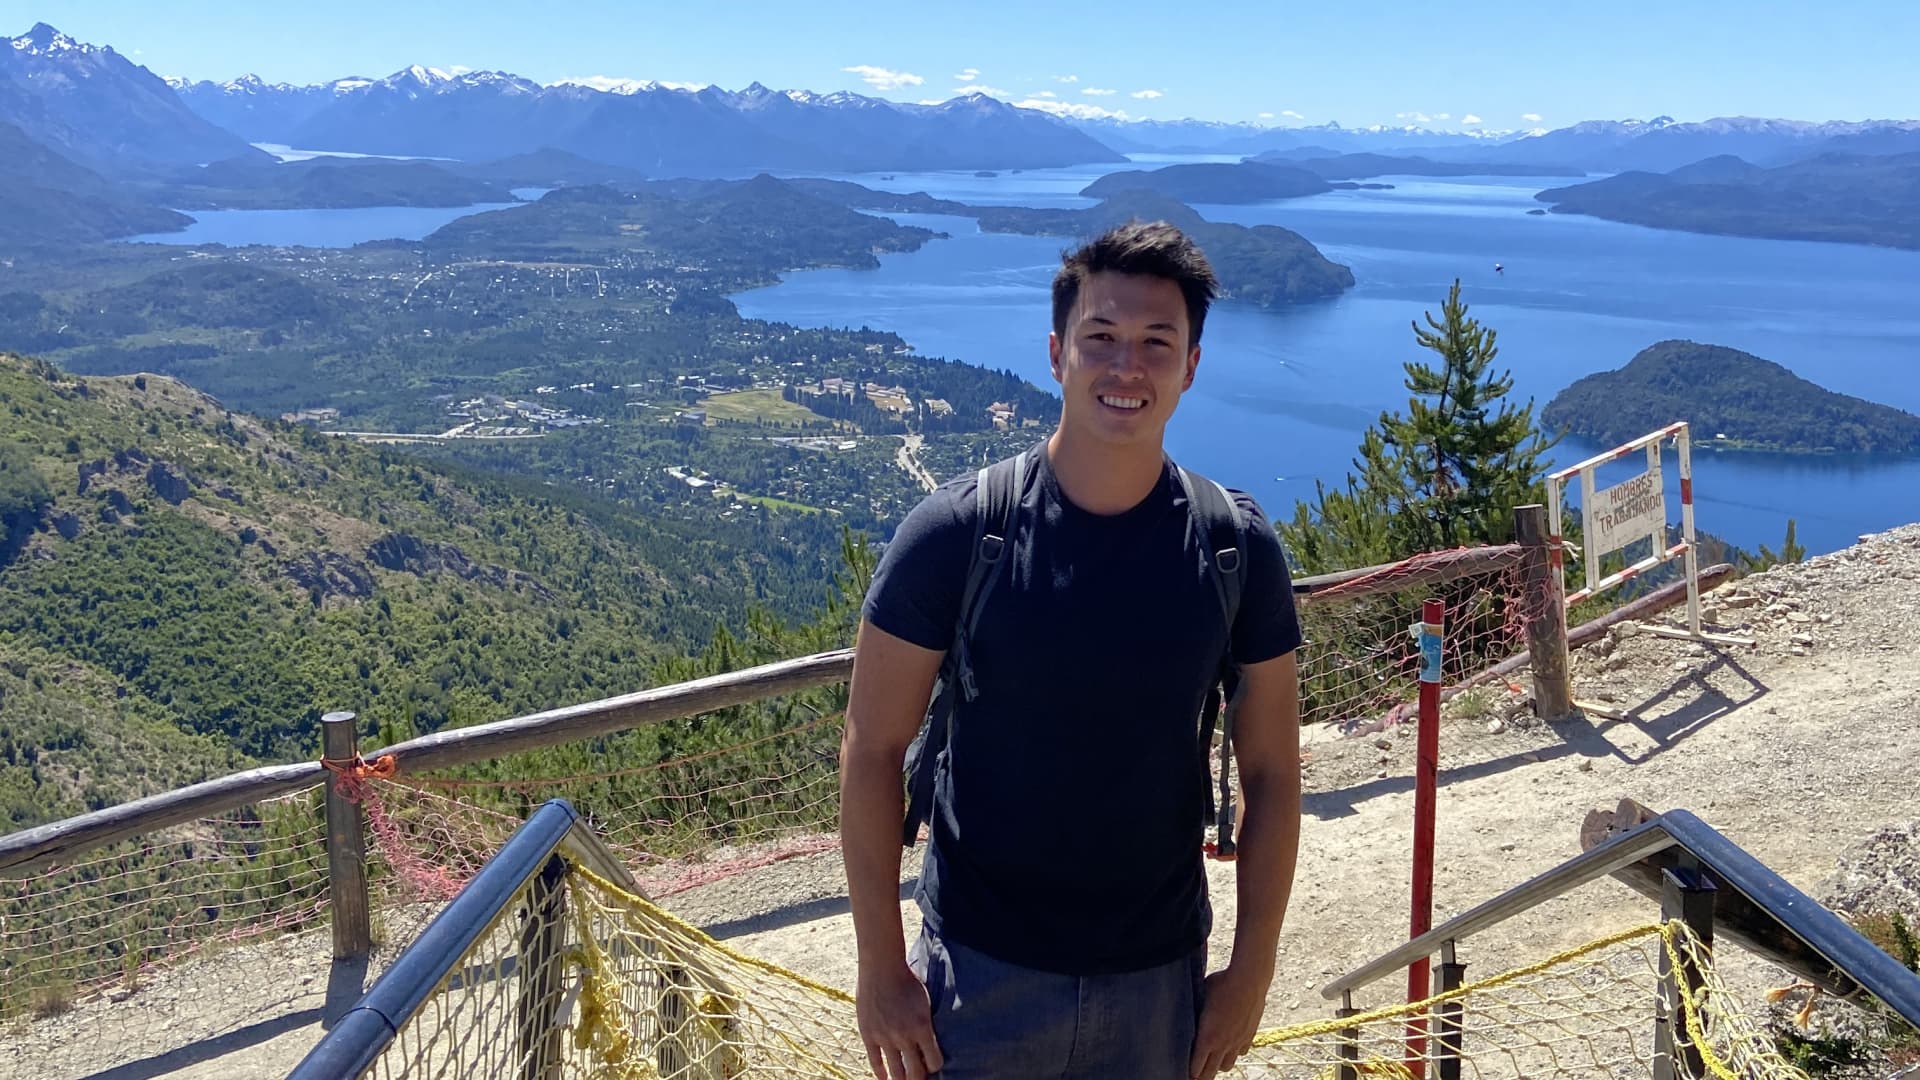 This 31-year-old spent $20,000 to travel after he was laid off